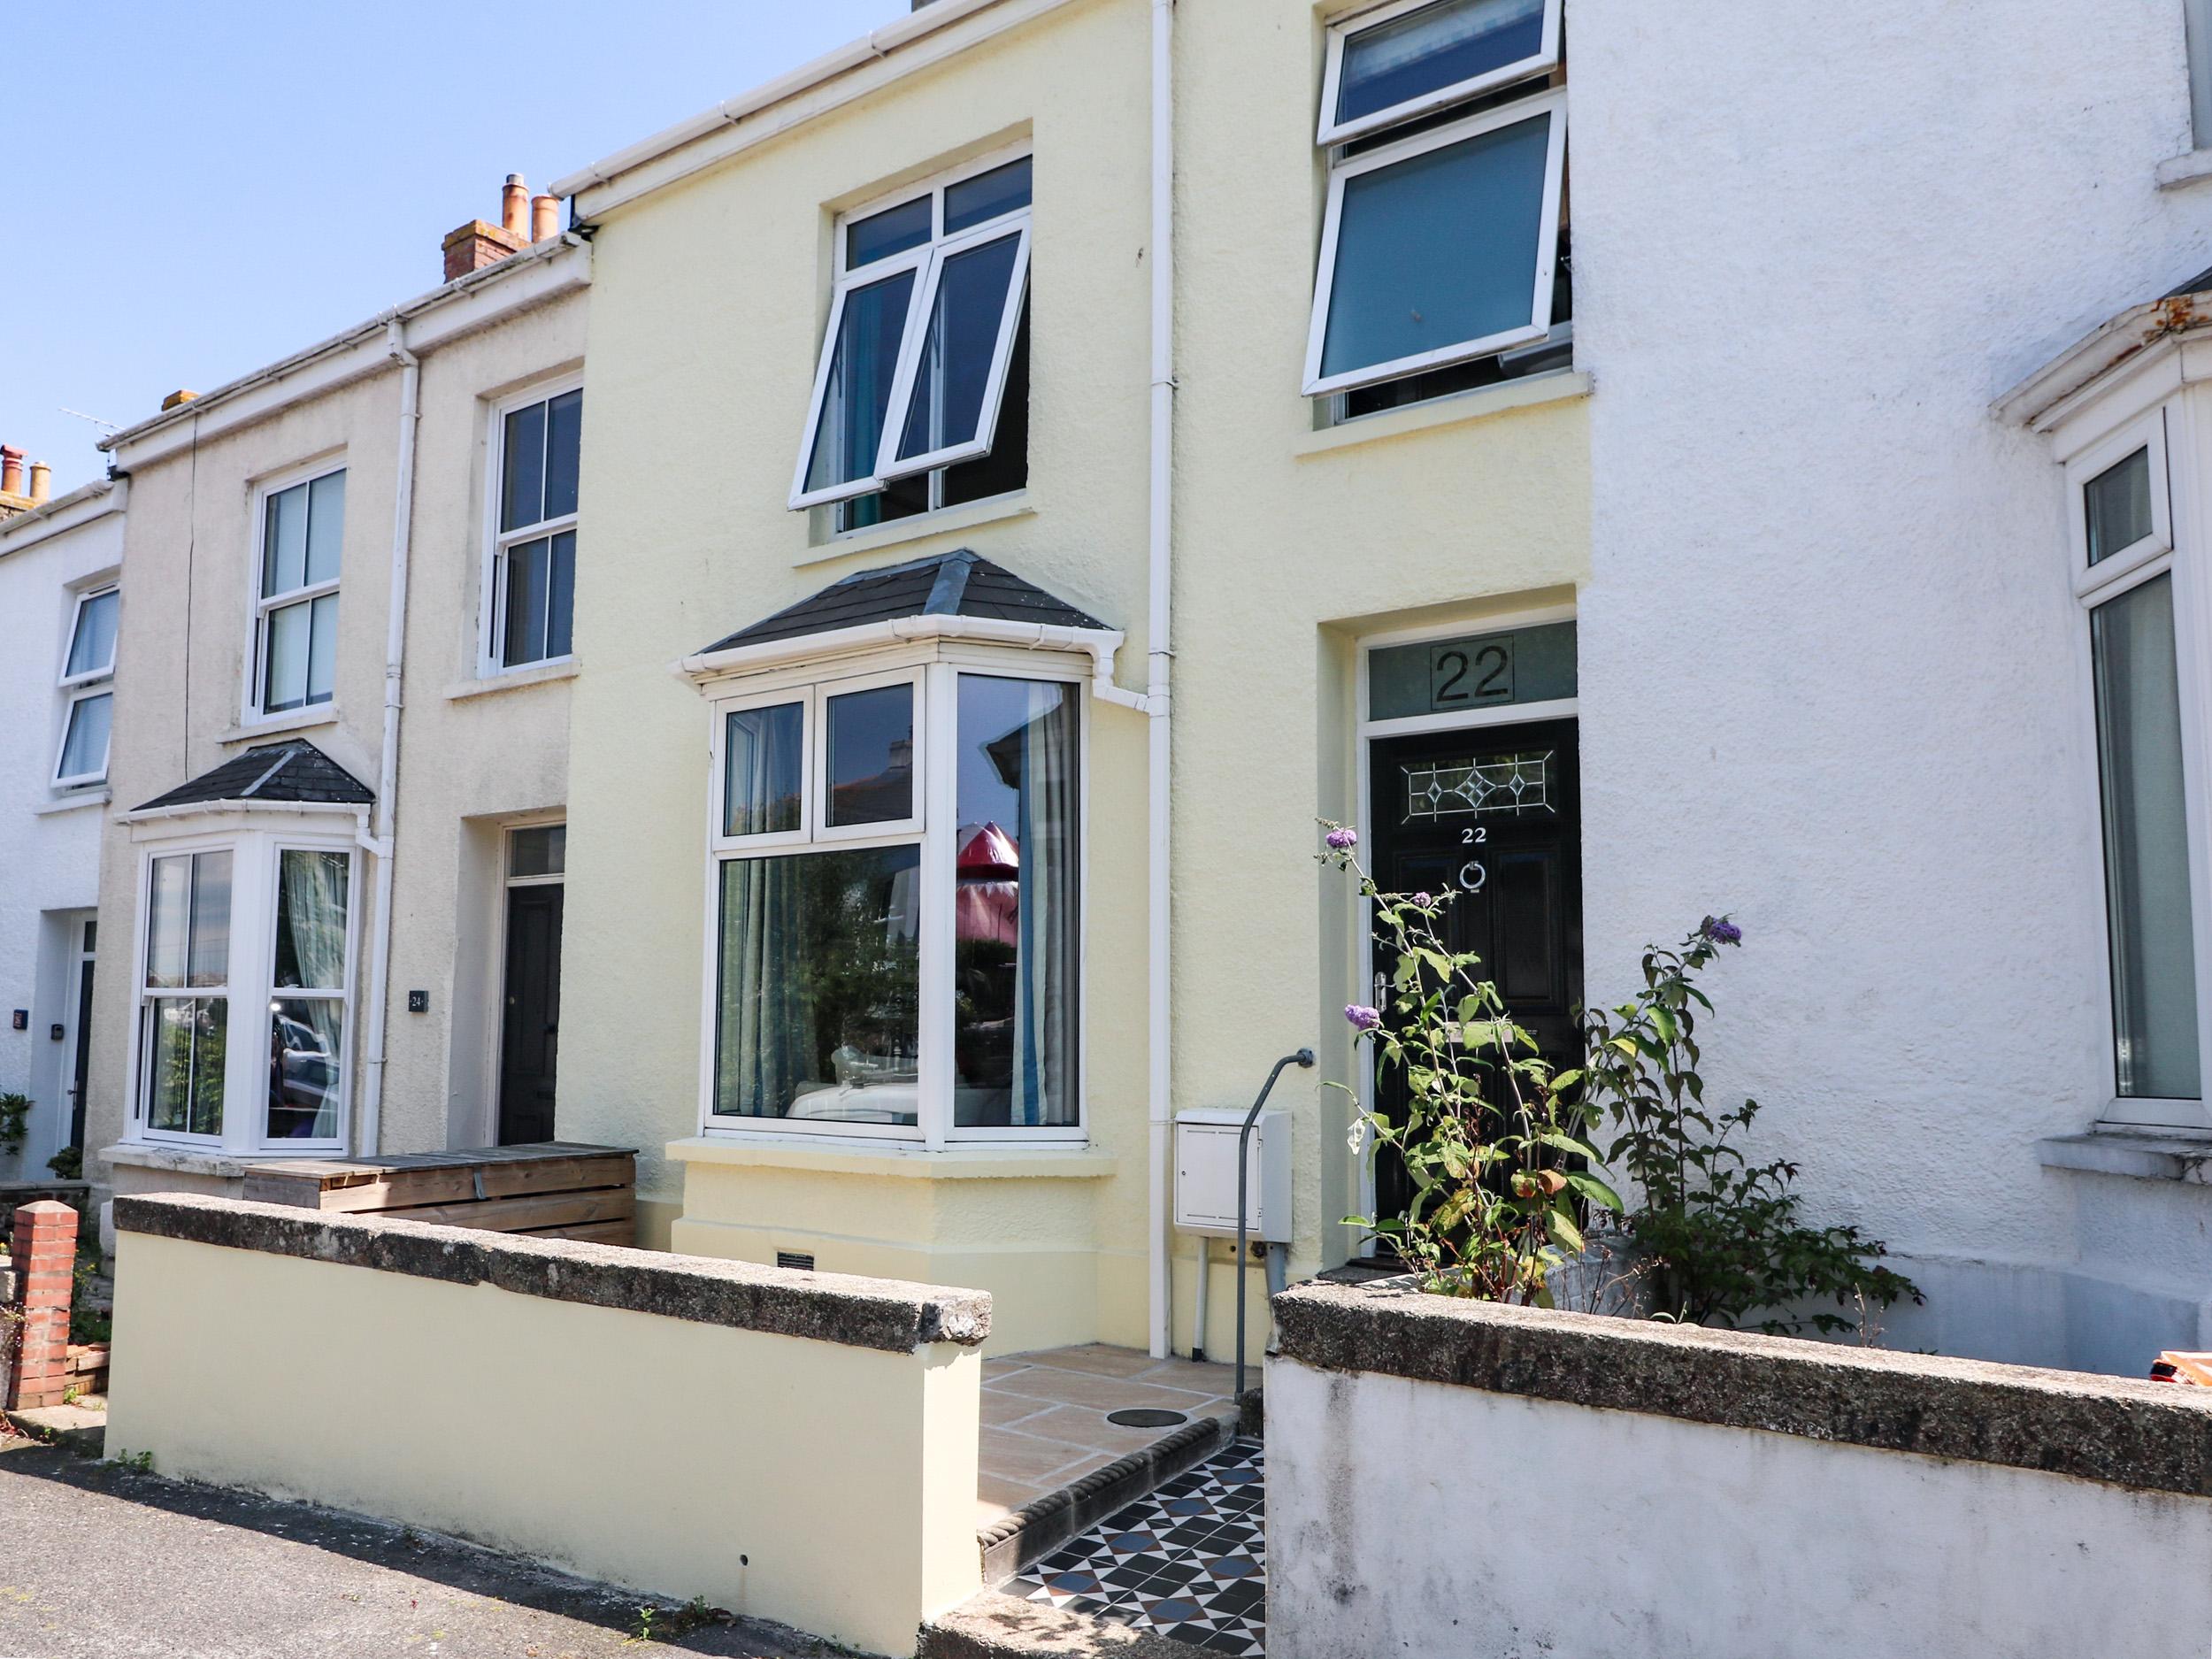 Holiday Cottage Reviews for 22 Clifton Terrace - Self Catering Property in Falmouth, Cornwall inc Scilly